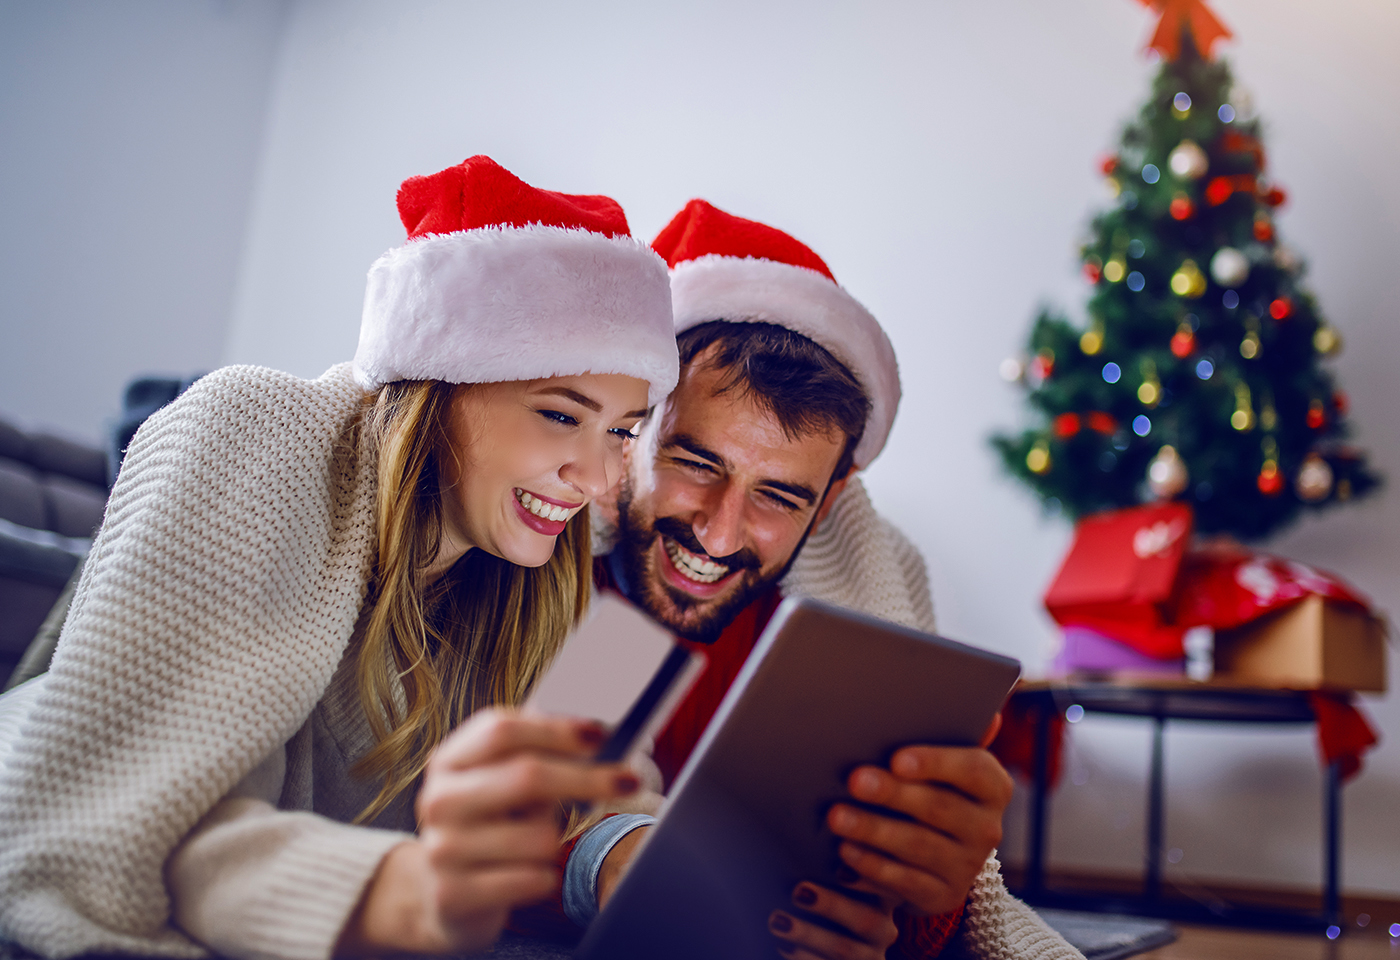 Christmas Loans - How To Make Holidays Better